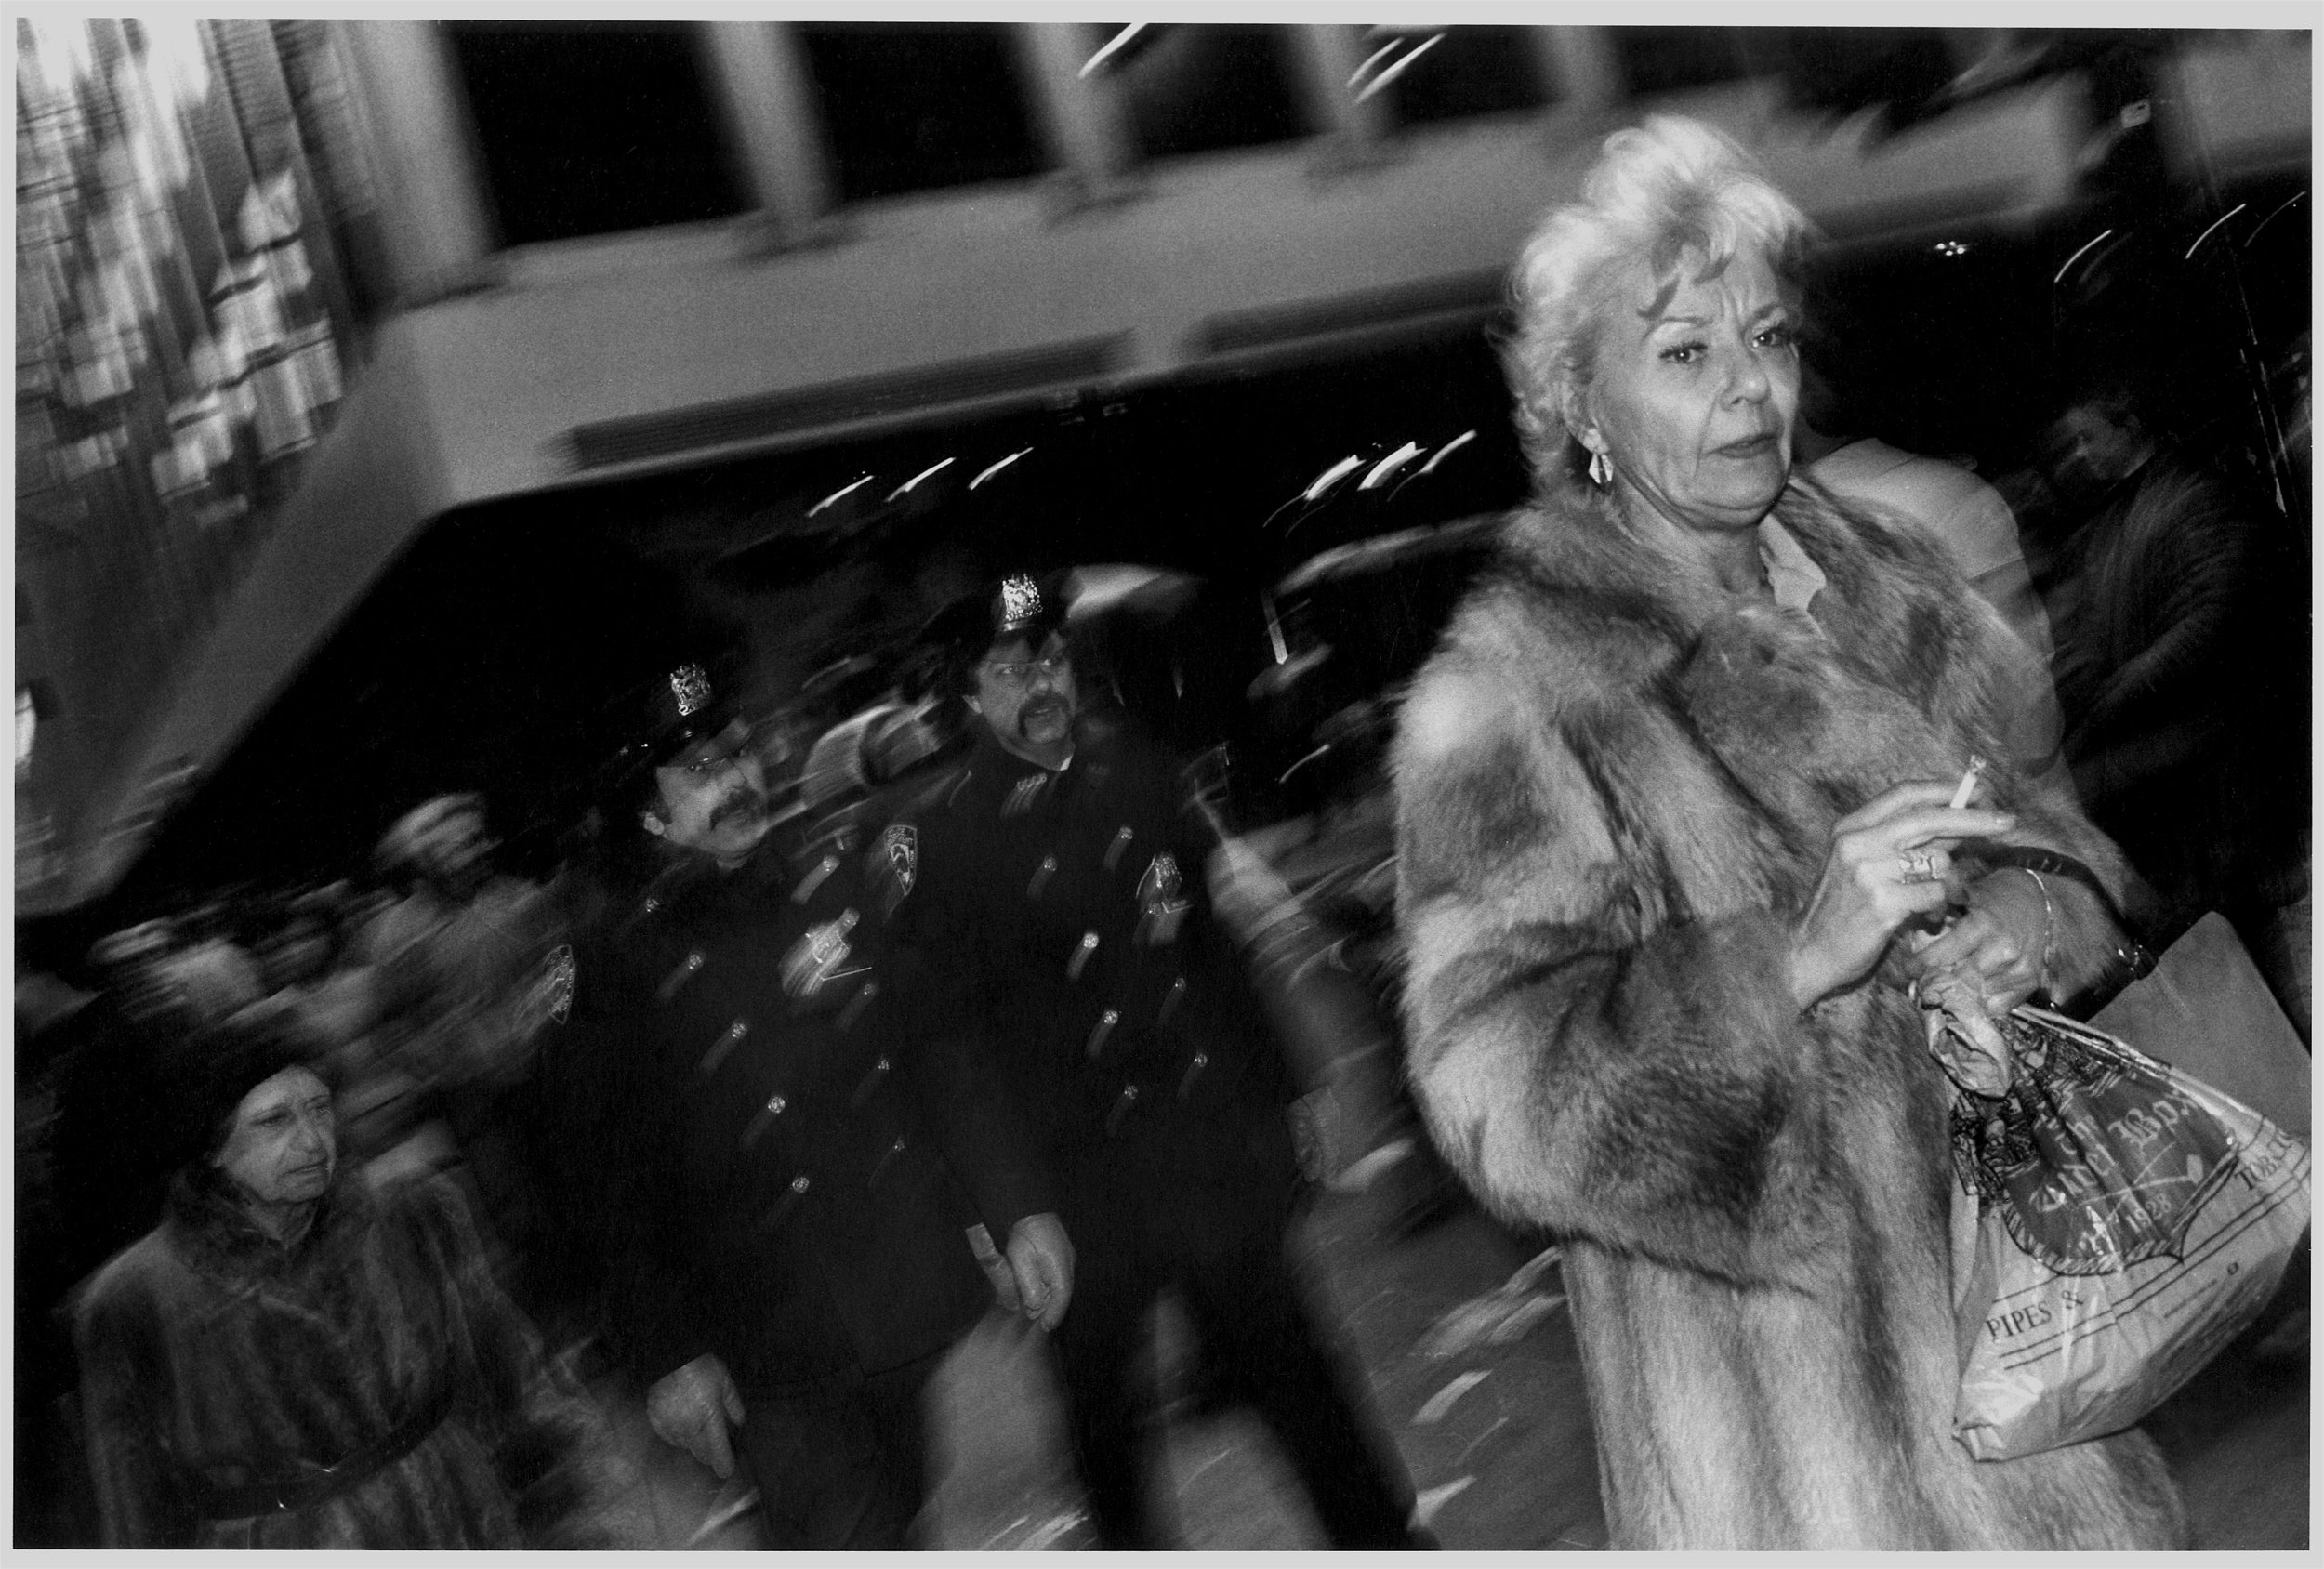 cops, woman in fur with cig, 5th ave., nyc, c. 1980